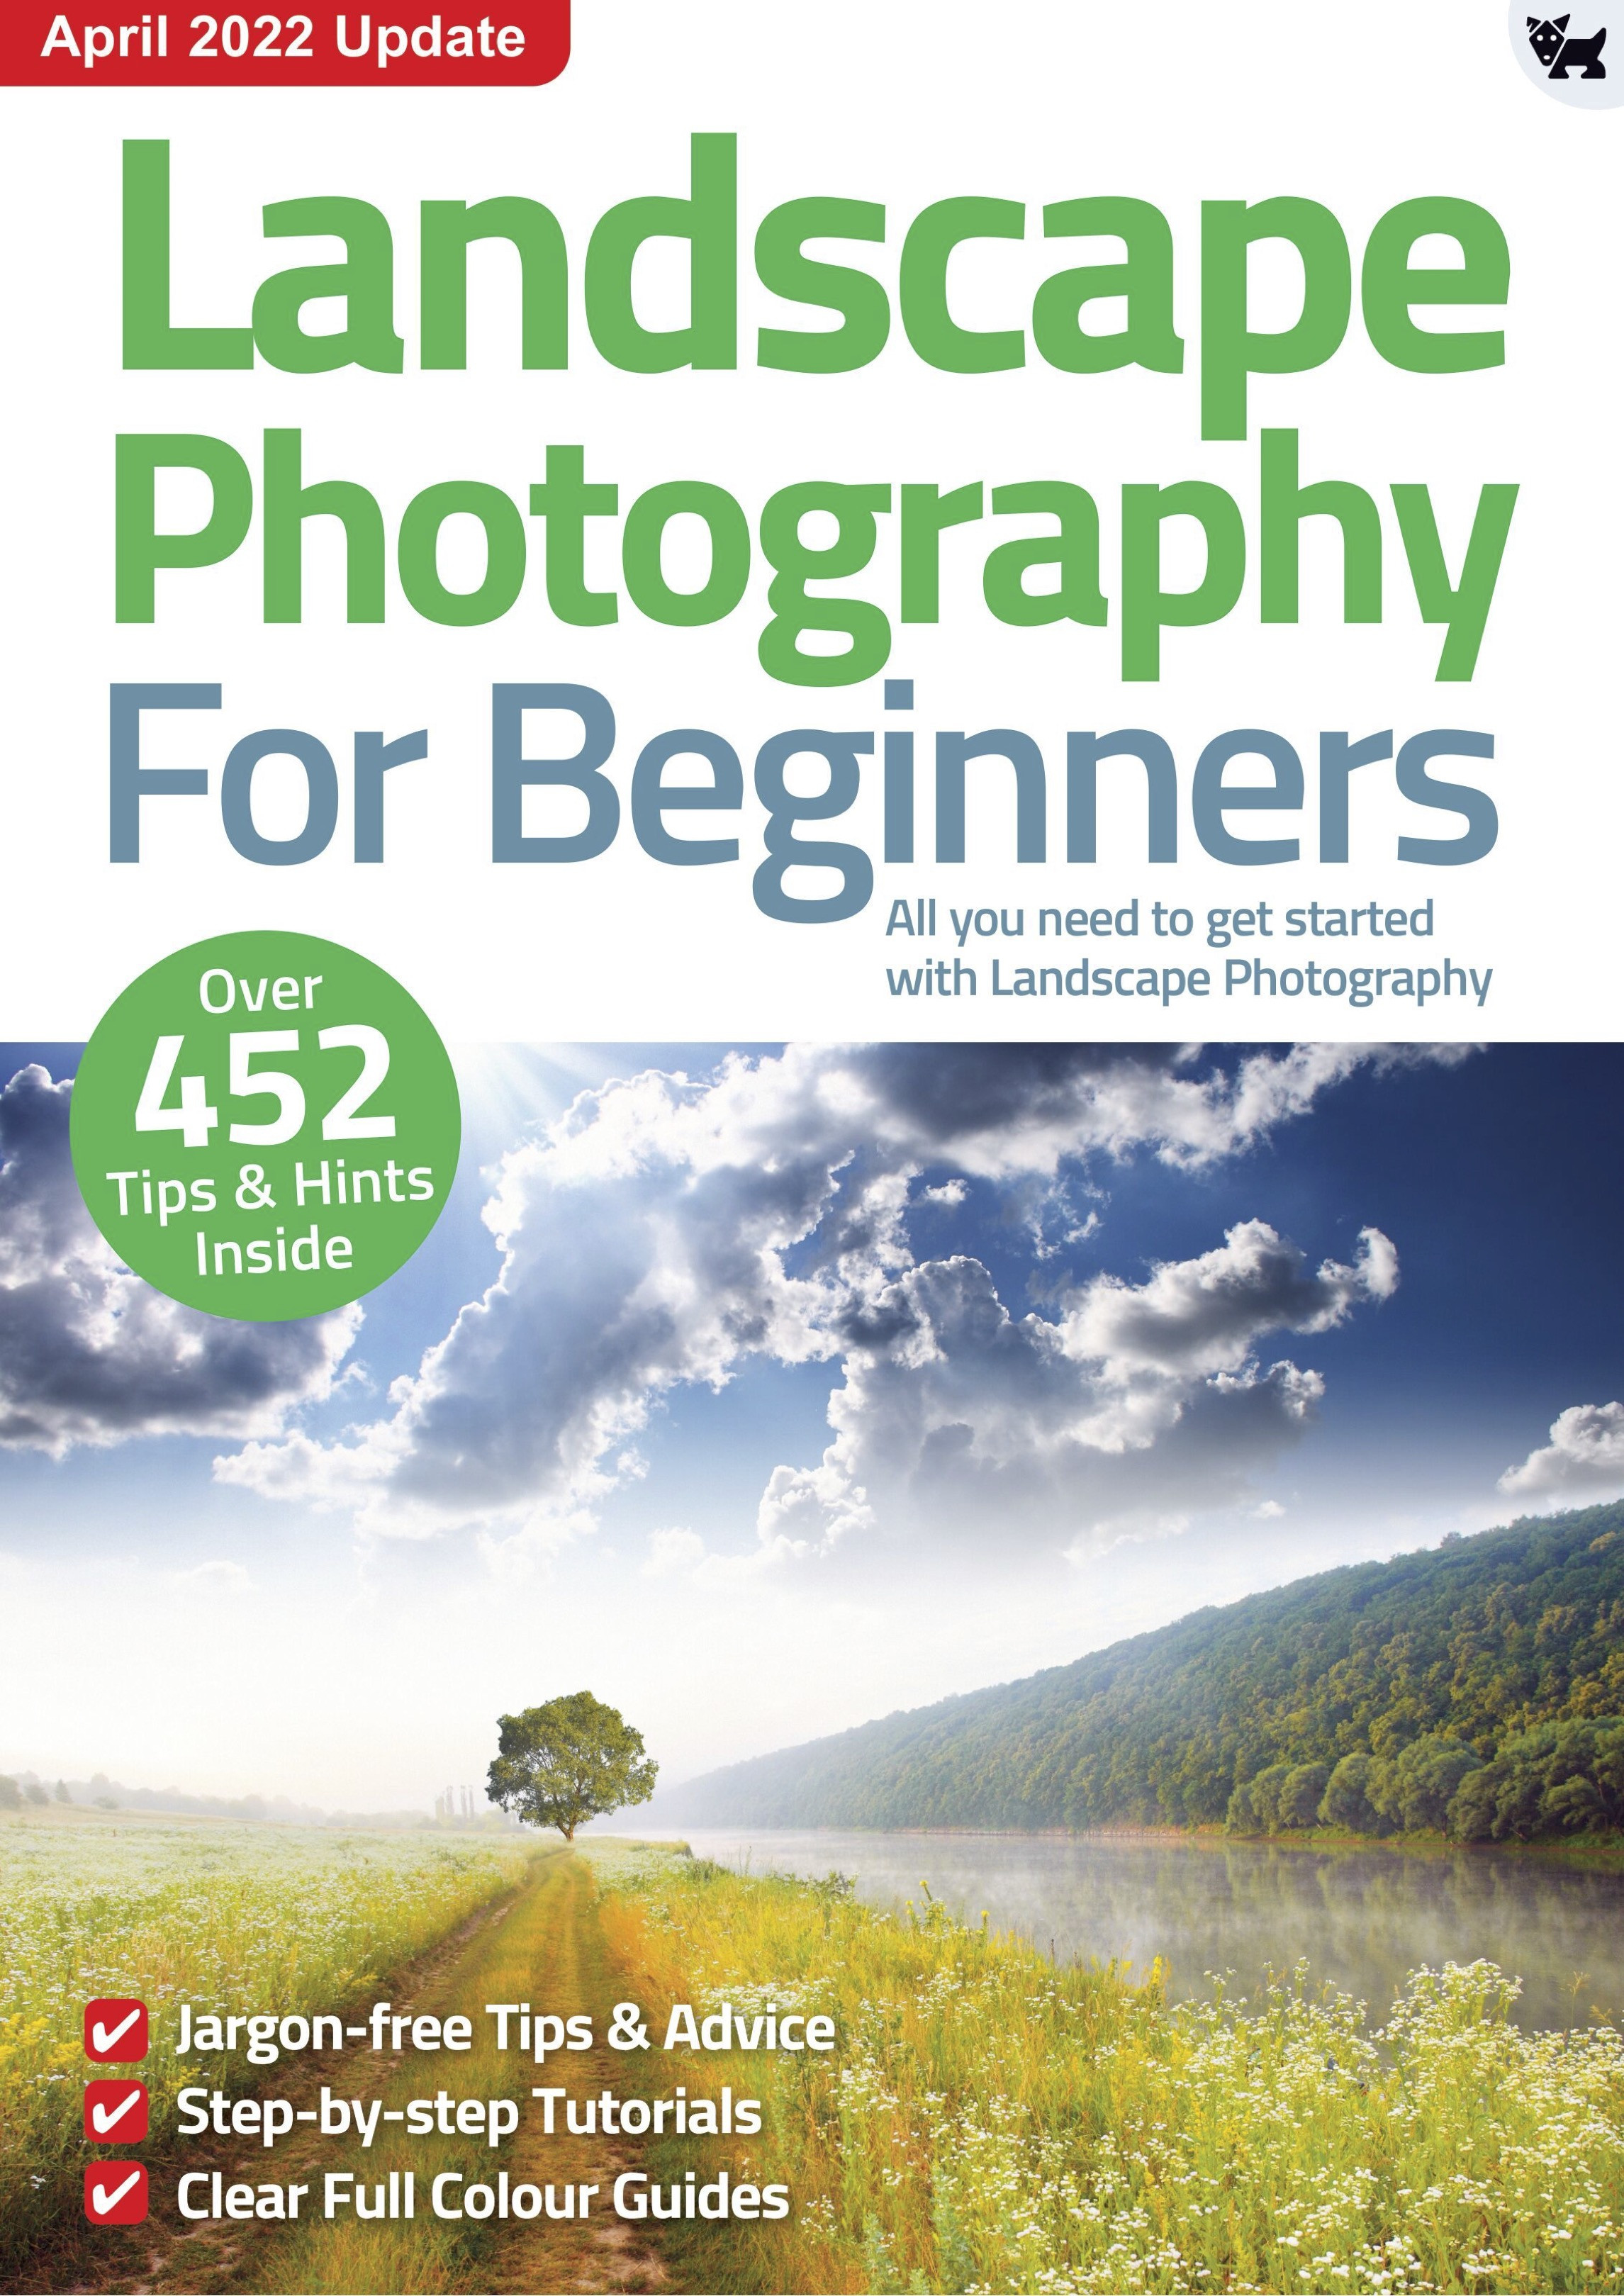 Landscape Photography For Beginners 04.2022